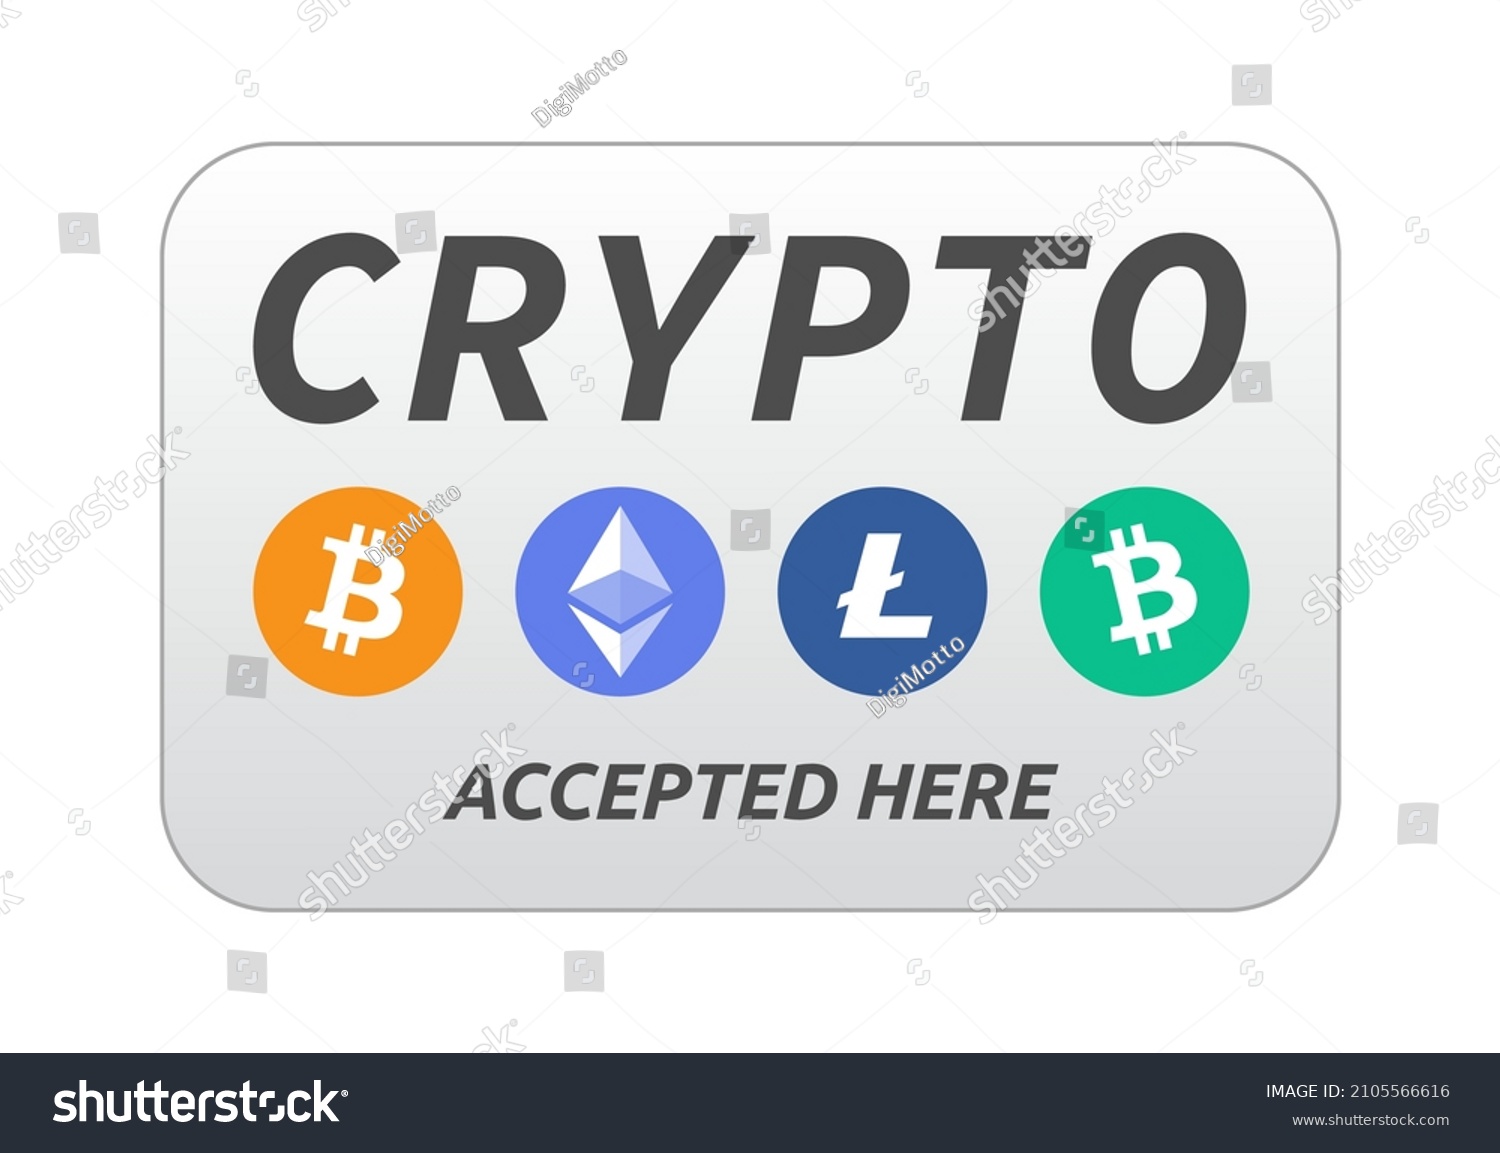 SVG of Crypto currency accepted here sign with Bitcoin, Ethereum, Litecoin button sticker vector illustration. Can be used as shop display sign, badge, label, card, print design, poster and graphic tag svg